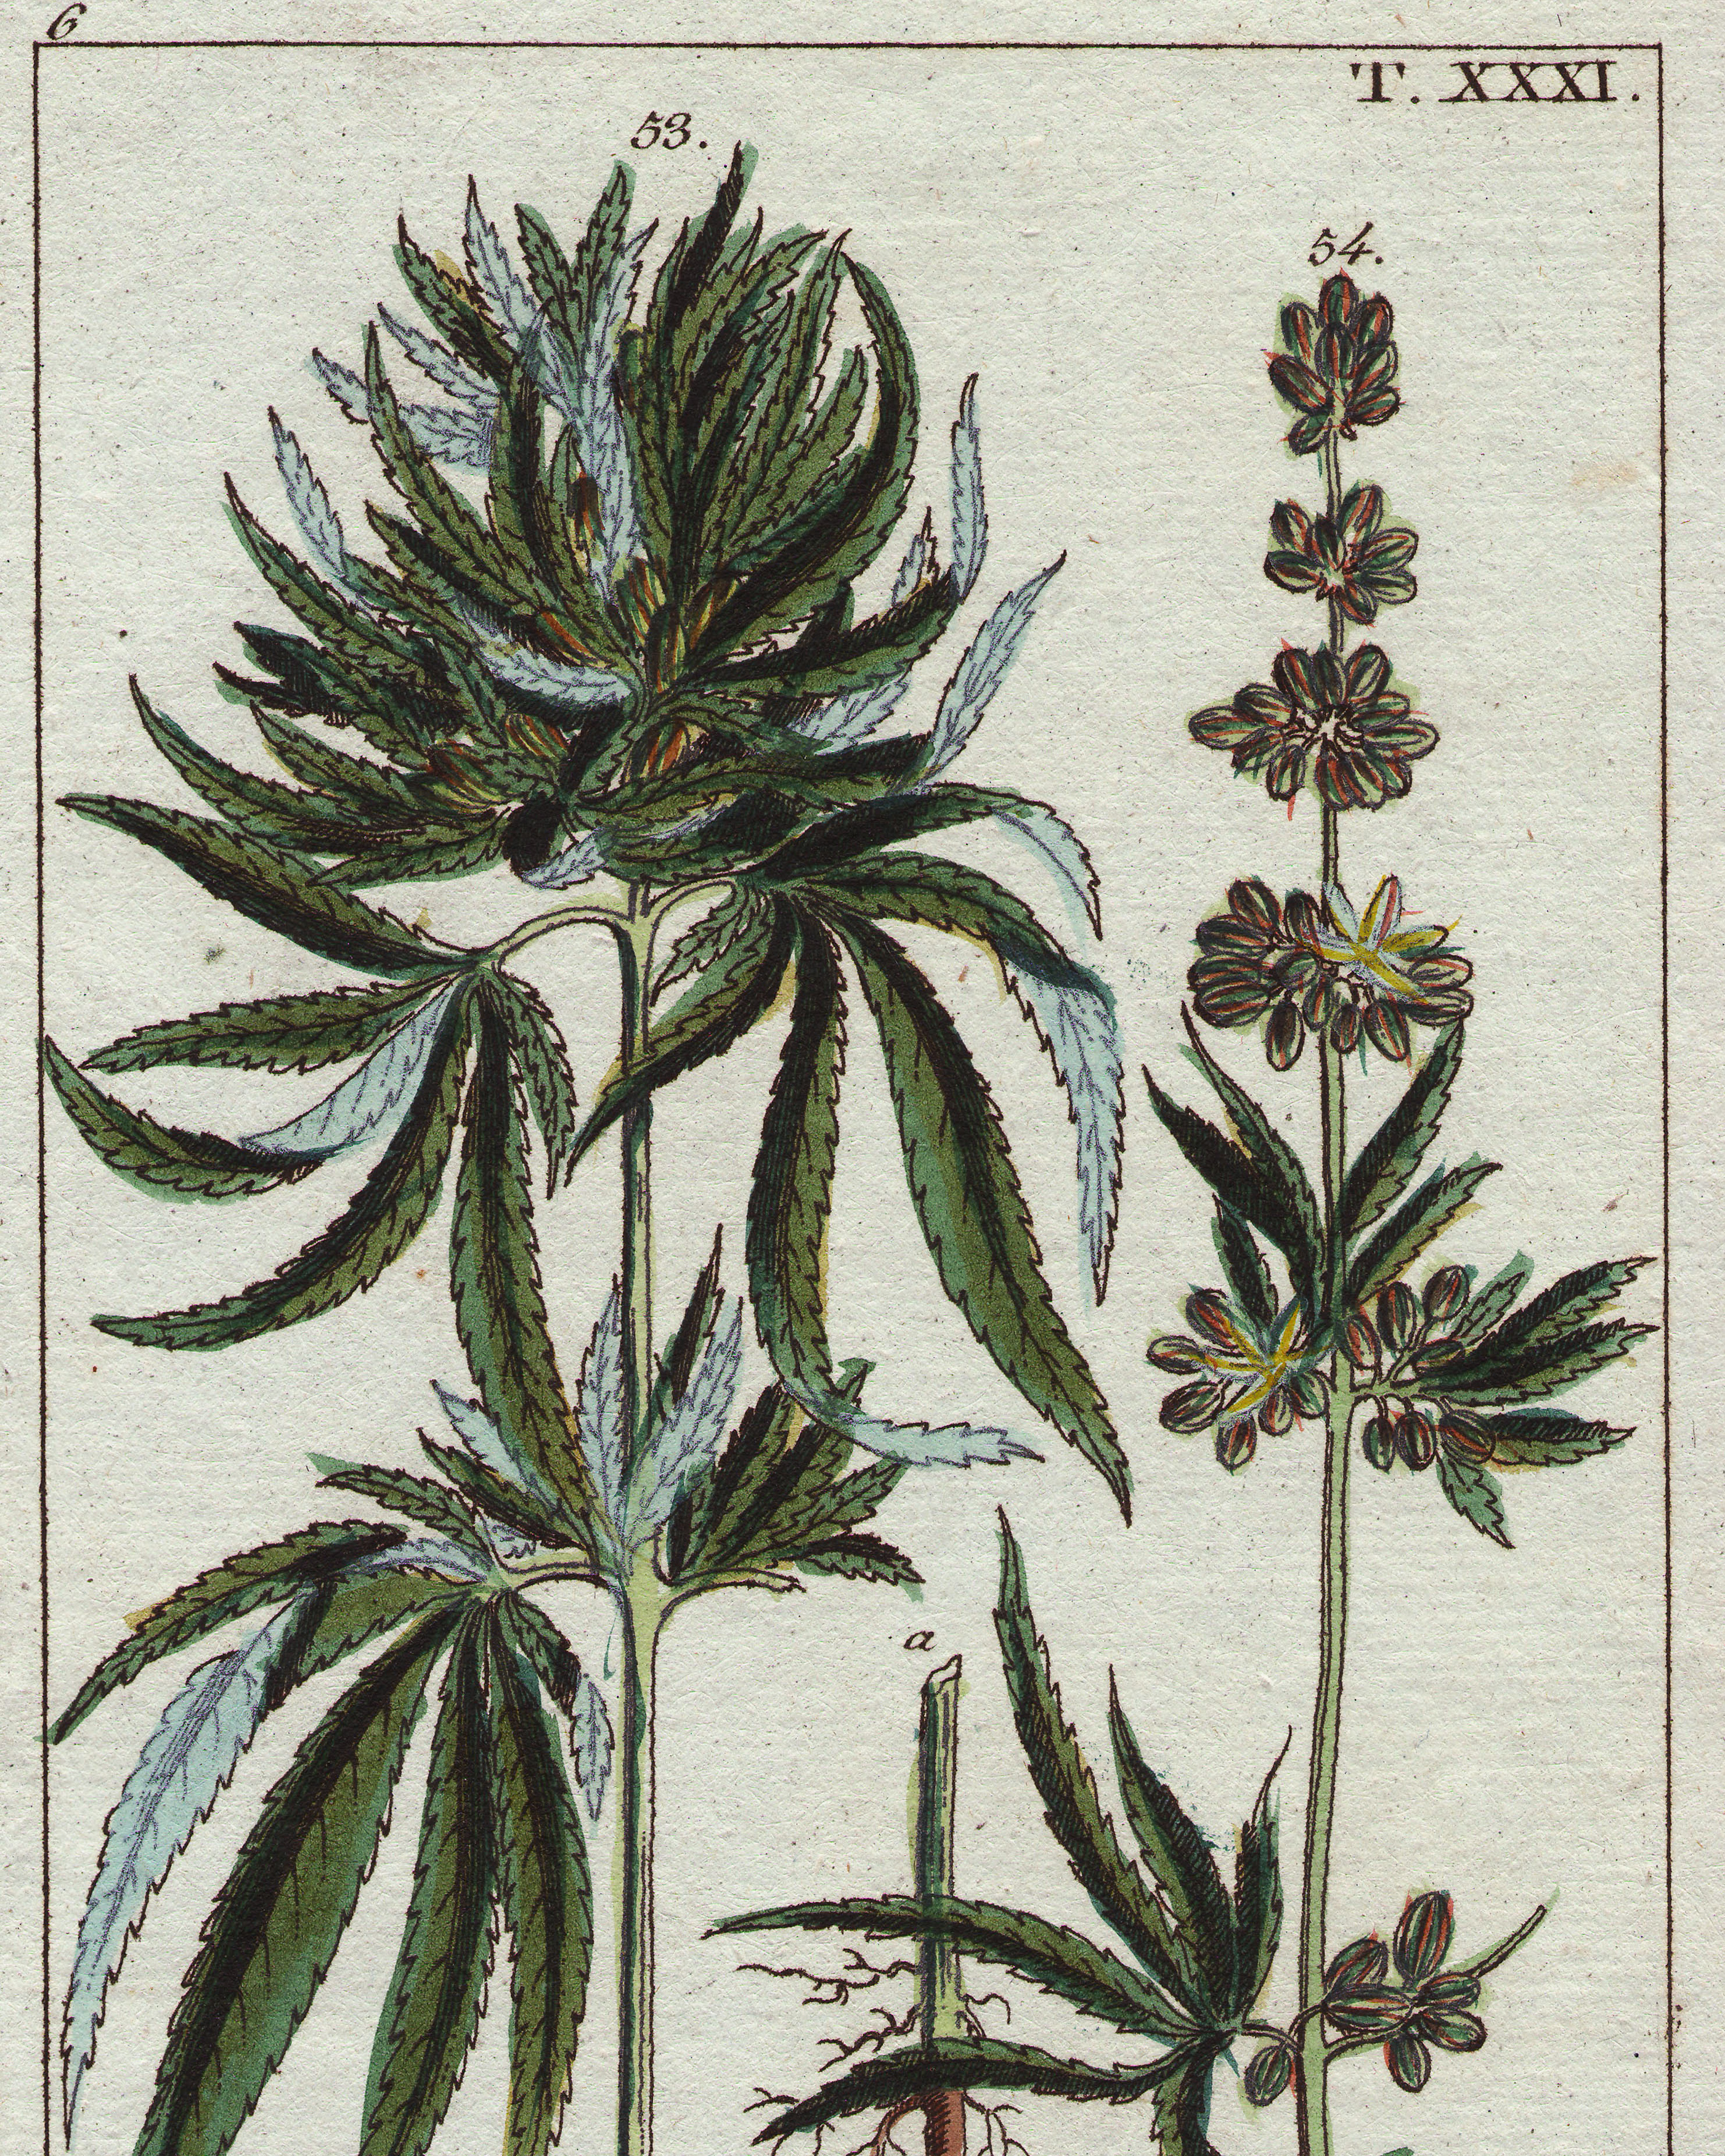 photo of The History of Marijuana–or Most of What You Should Know By Now image